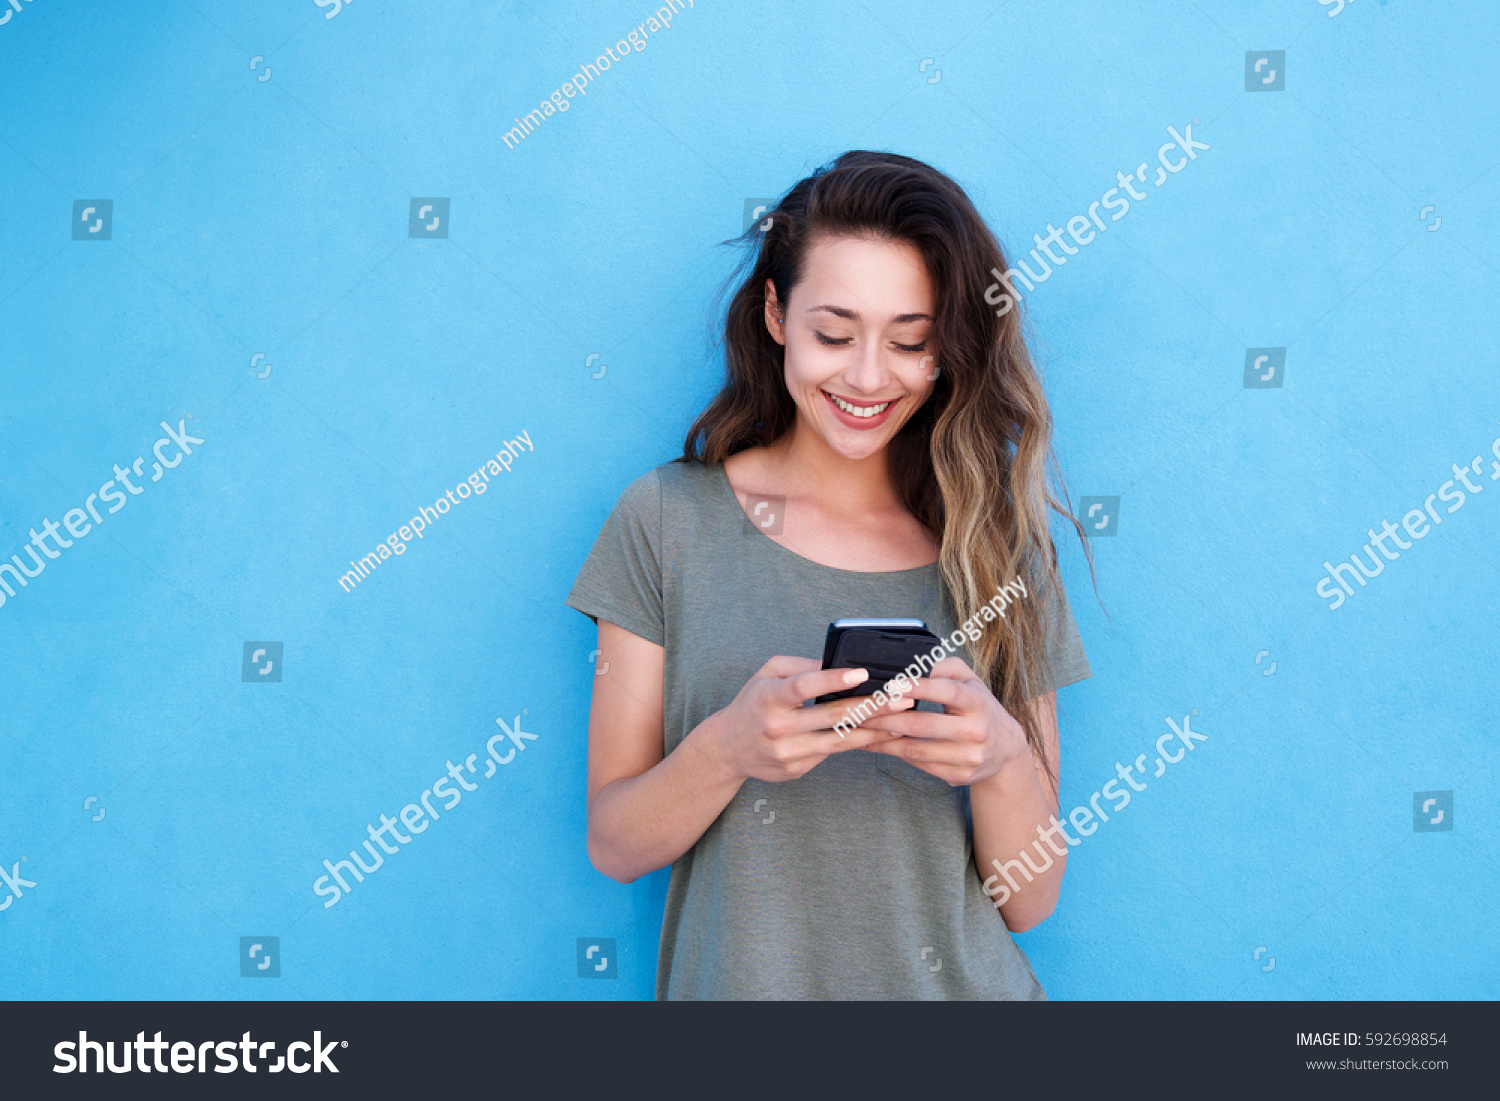 Front portrait of young smiling woman using mobile phone against blue background #592698854